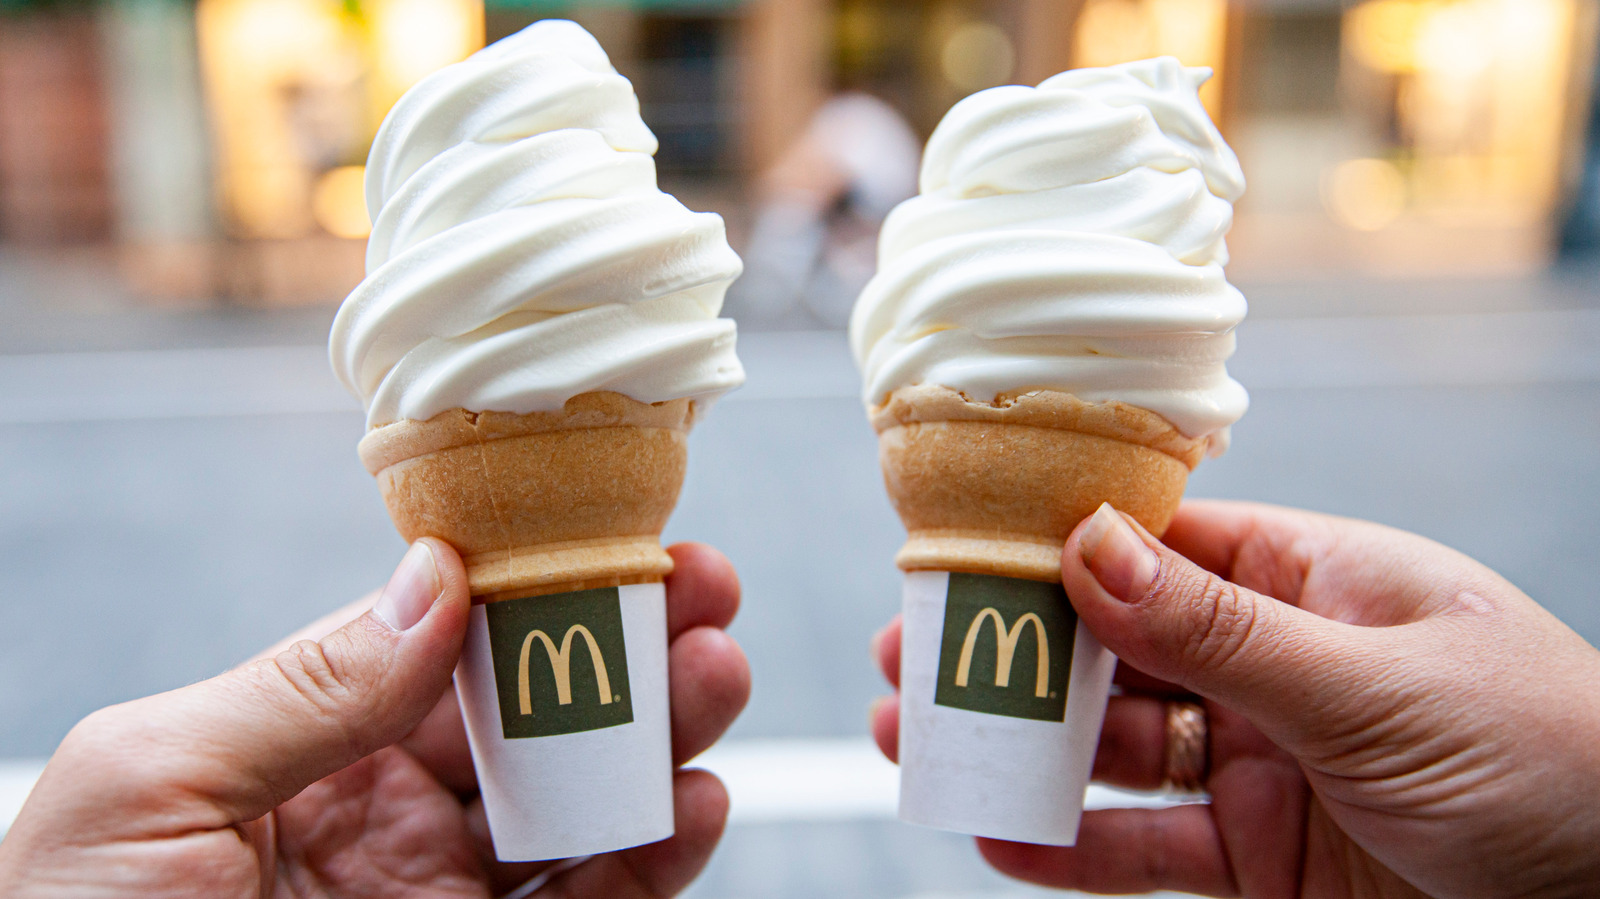 https://www.thedailymeal.com/img/gallery/all-of-your-mcdonalds-ice-cream-questions-answered/l-intro-1701703286.jpg